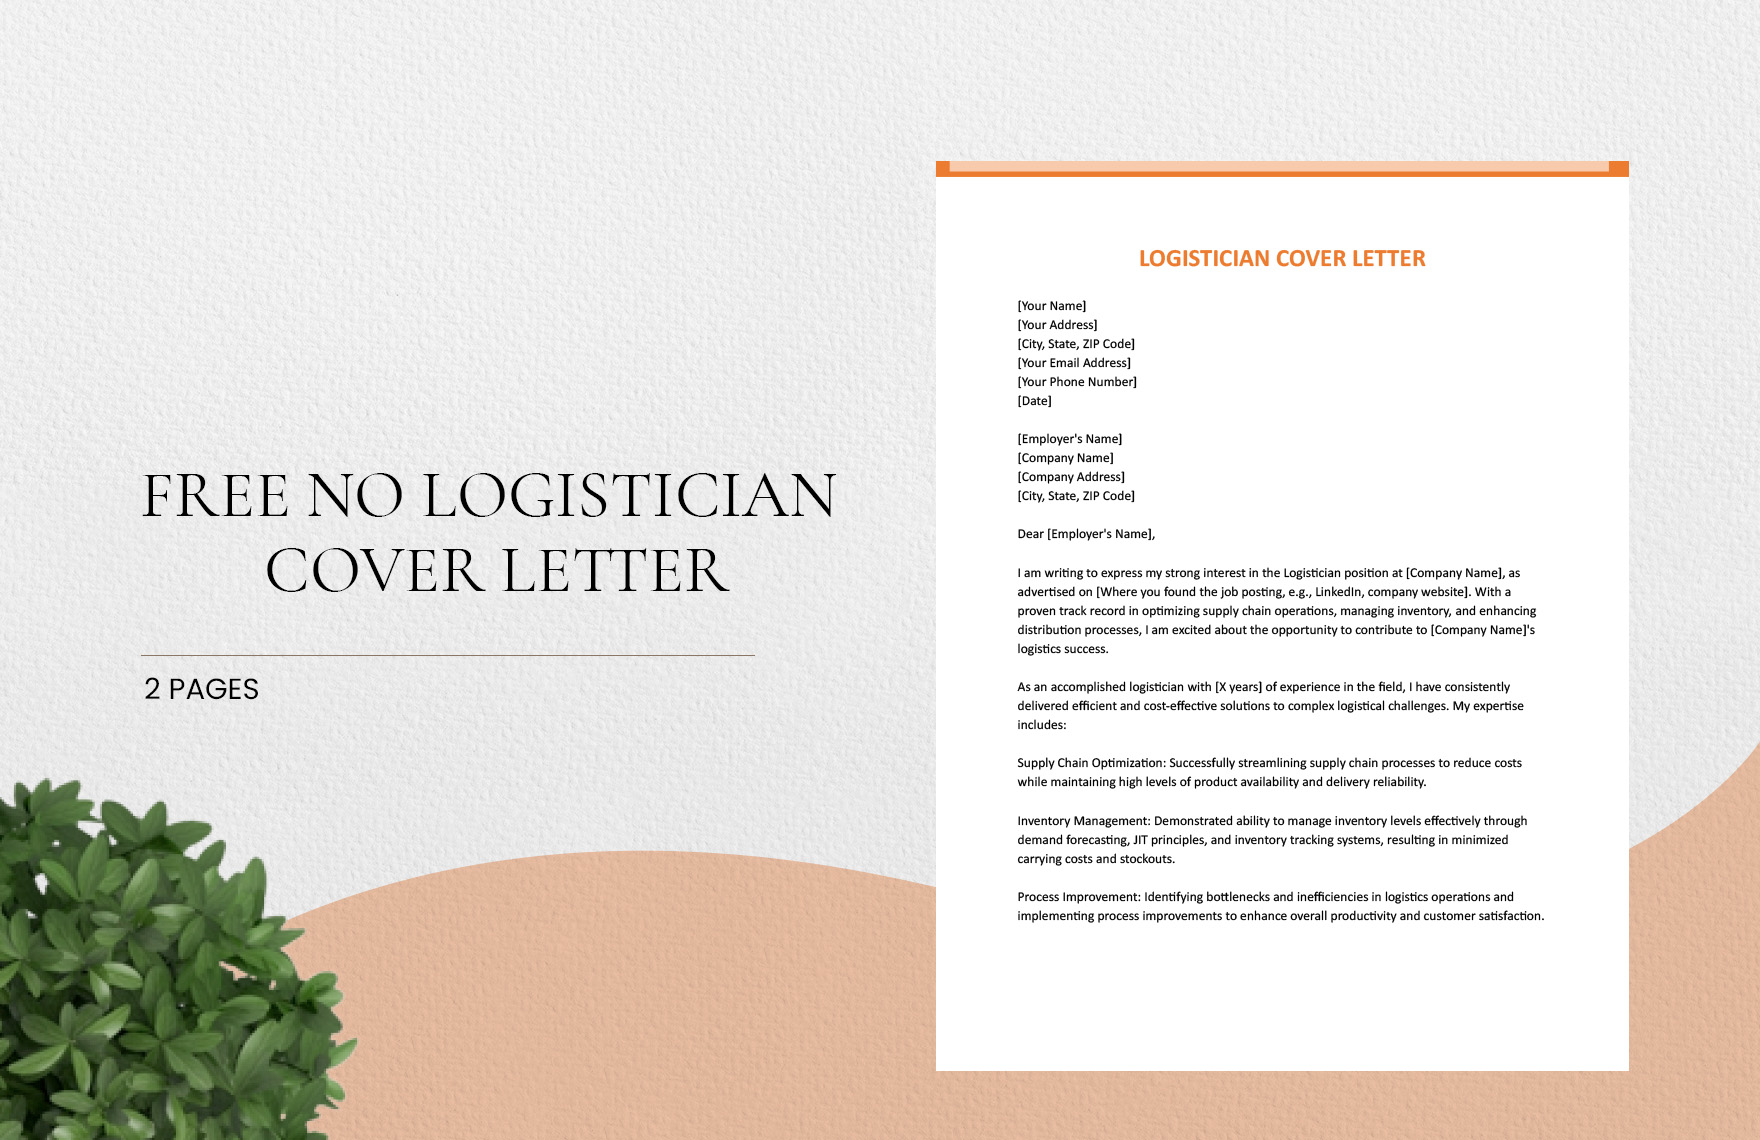 Logistician Cover Letter